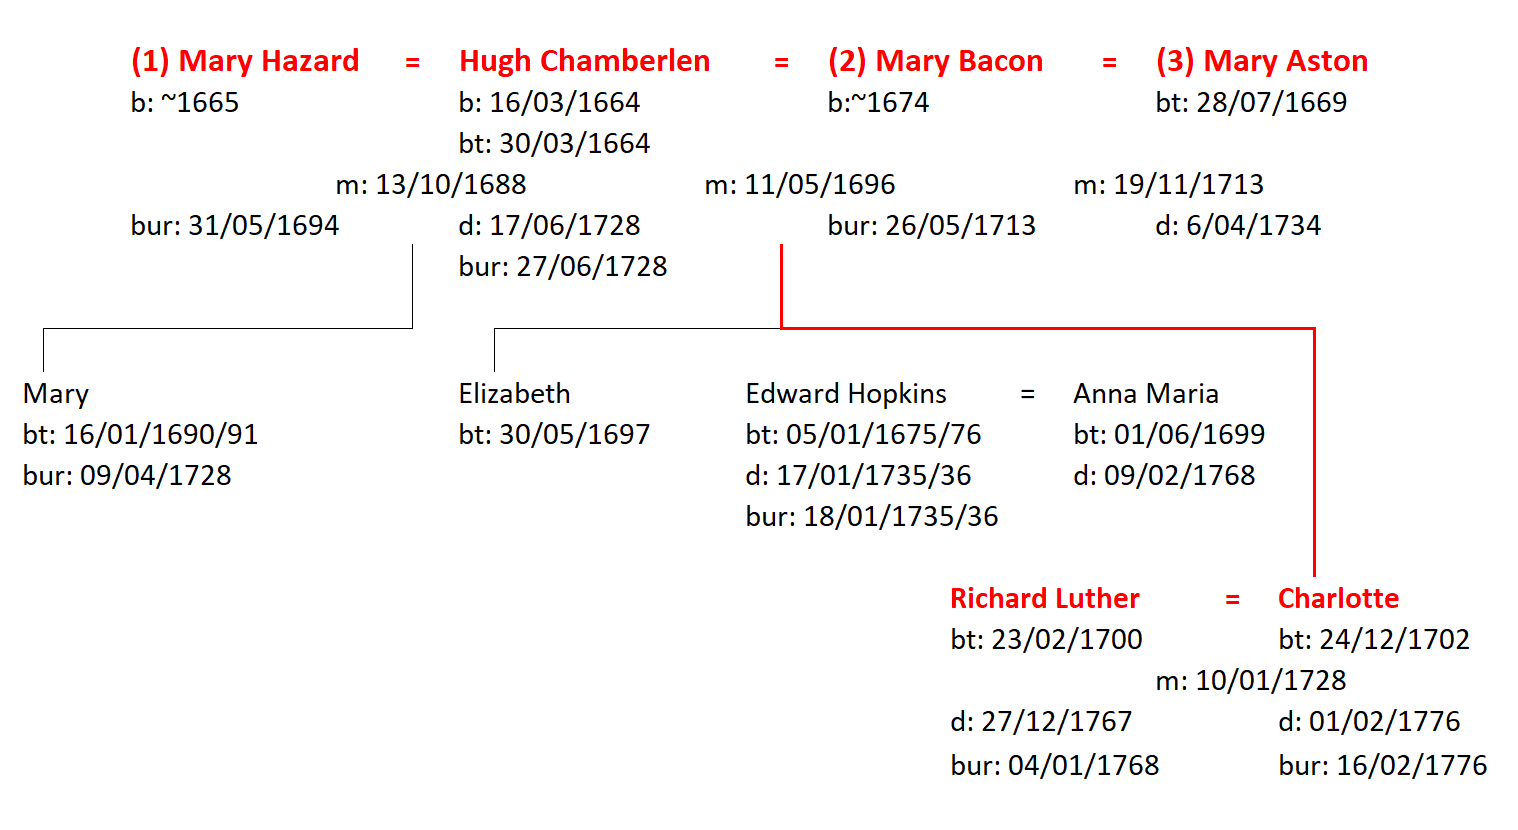 Figure 7: The Family of Hugh Chamberlen the younger